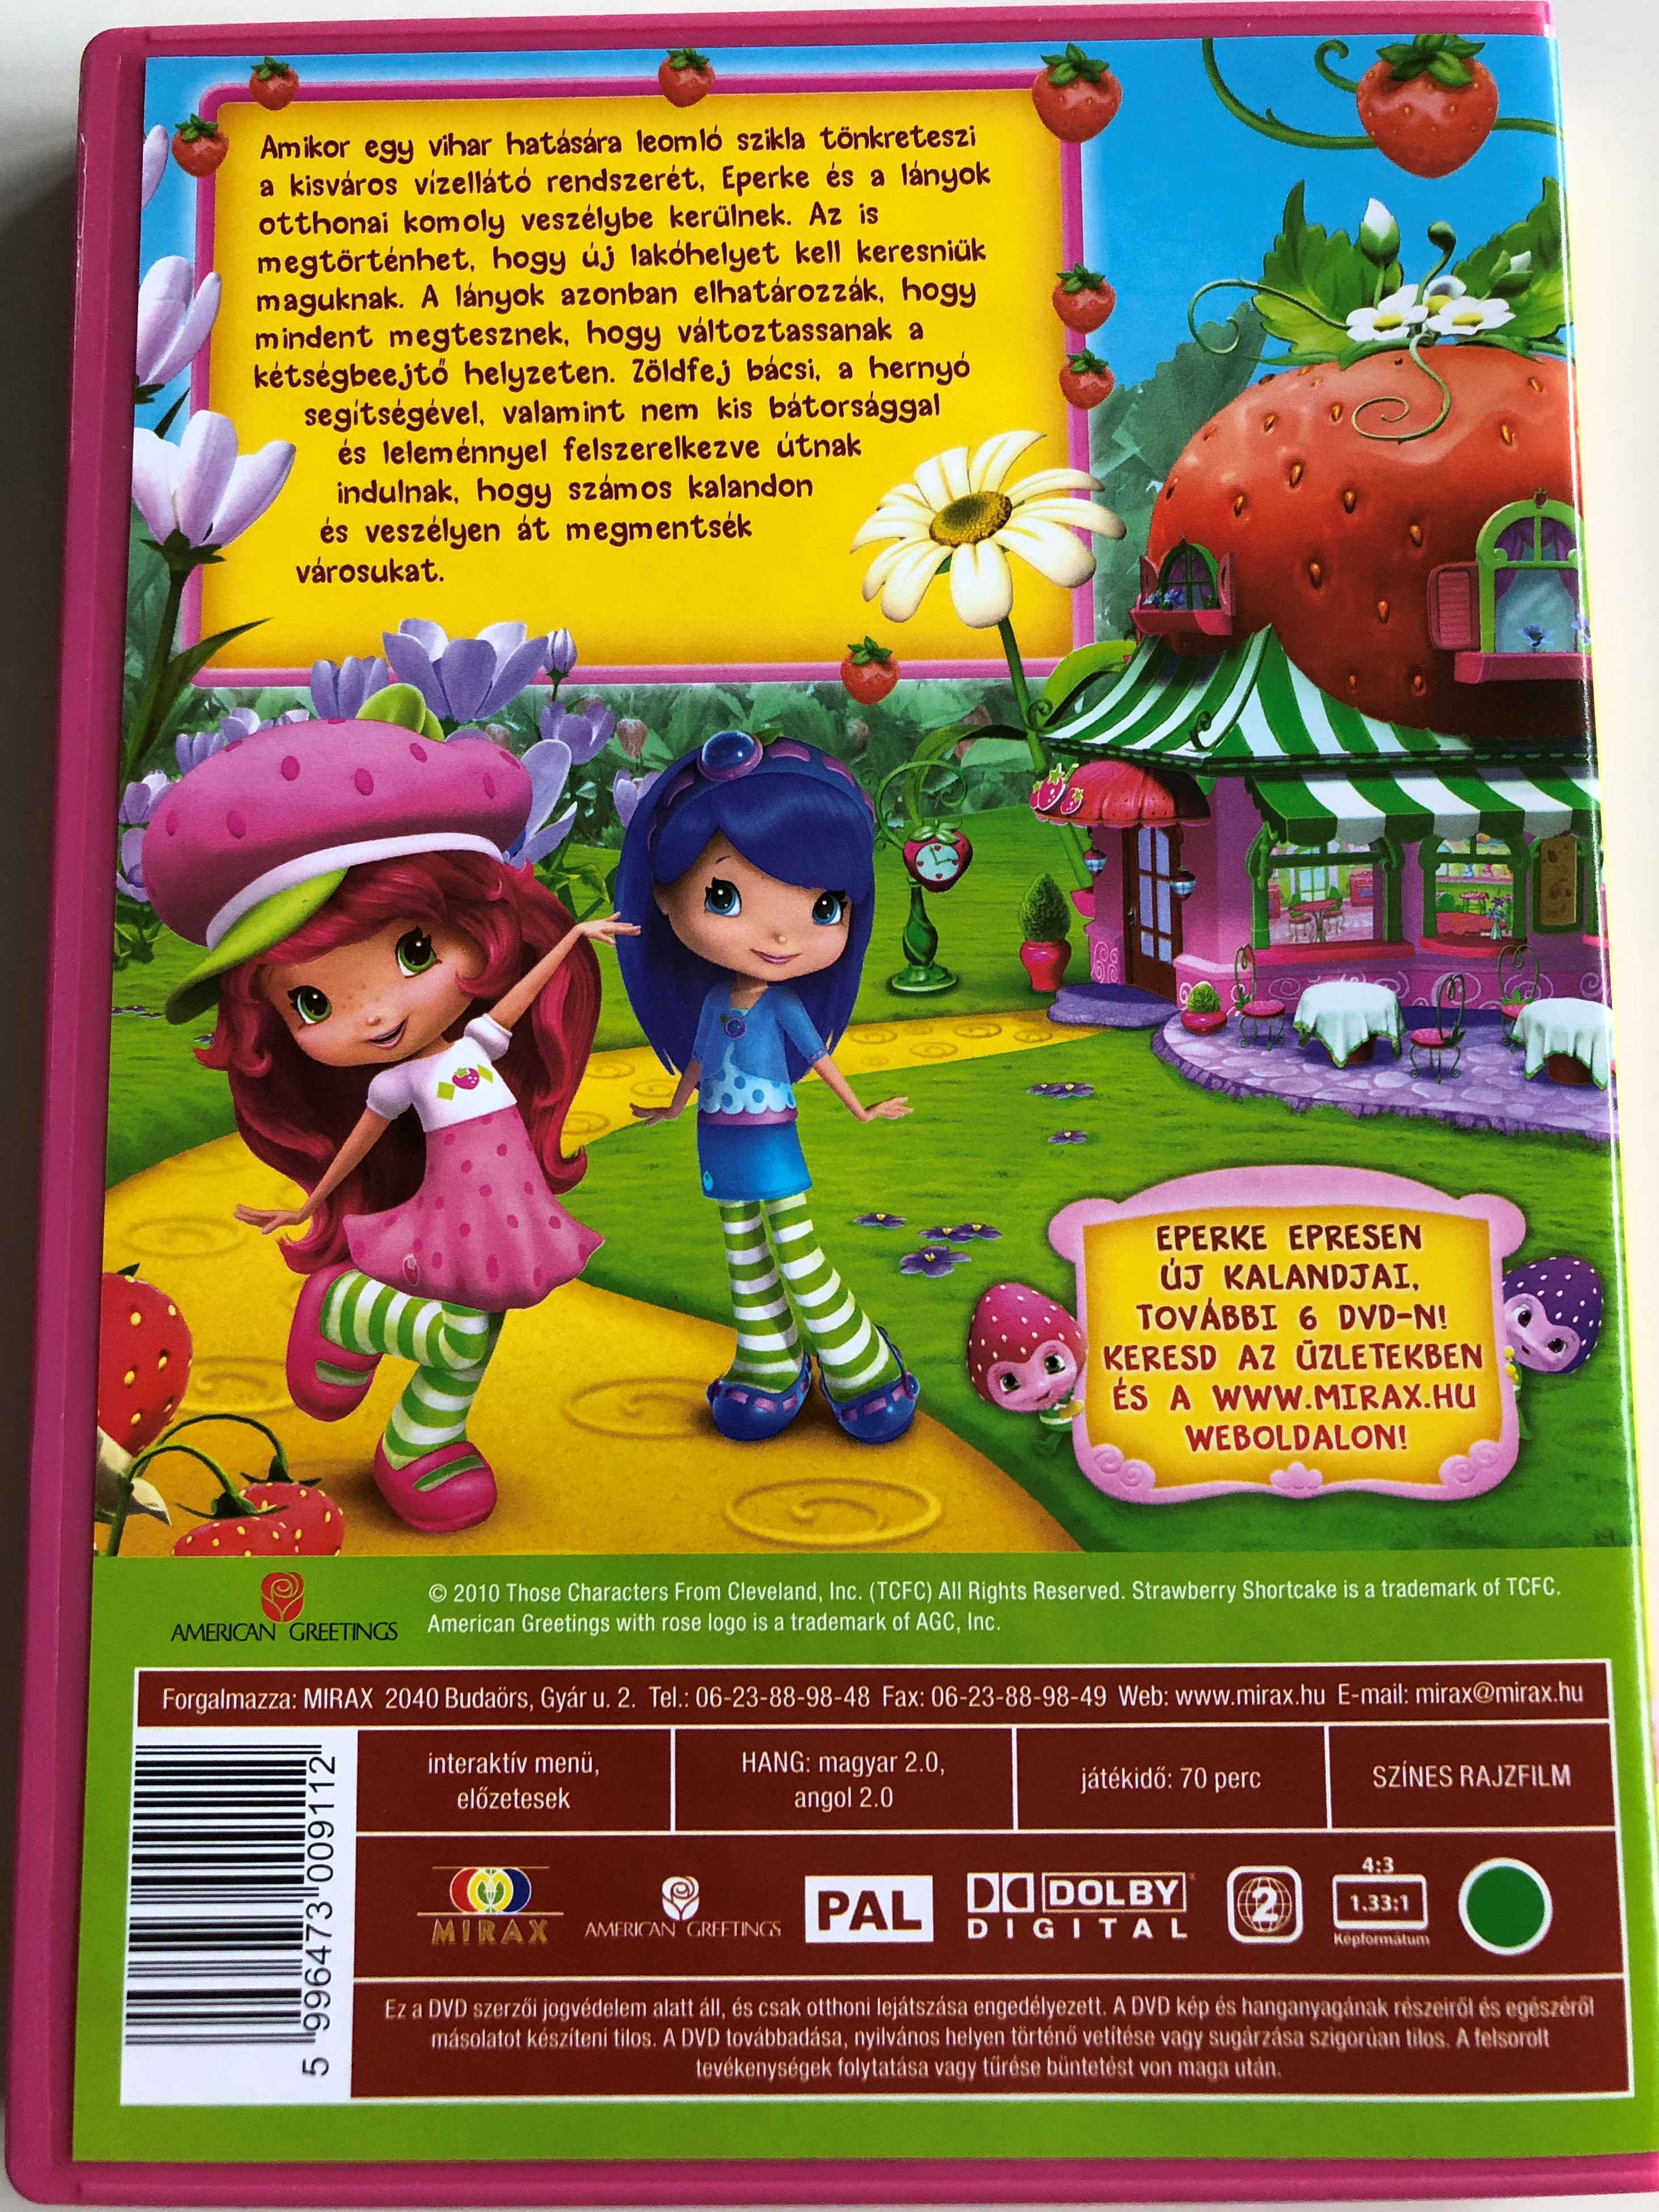 strawberry-shortcake-sky-s-the-limit-dvd-2009-eperke-a-mozifilm-hat-r-a-csillagos-g-directed-by-michael-hack-mucci-fassett-2-.jpg